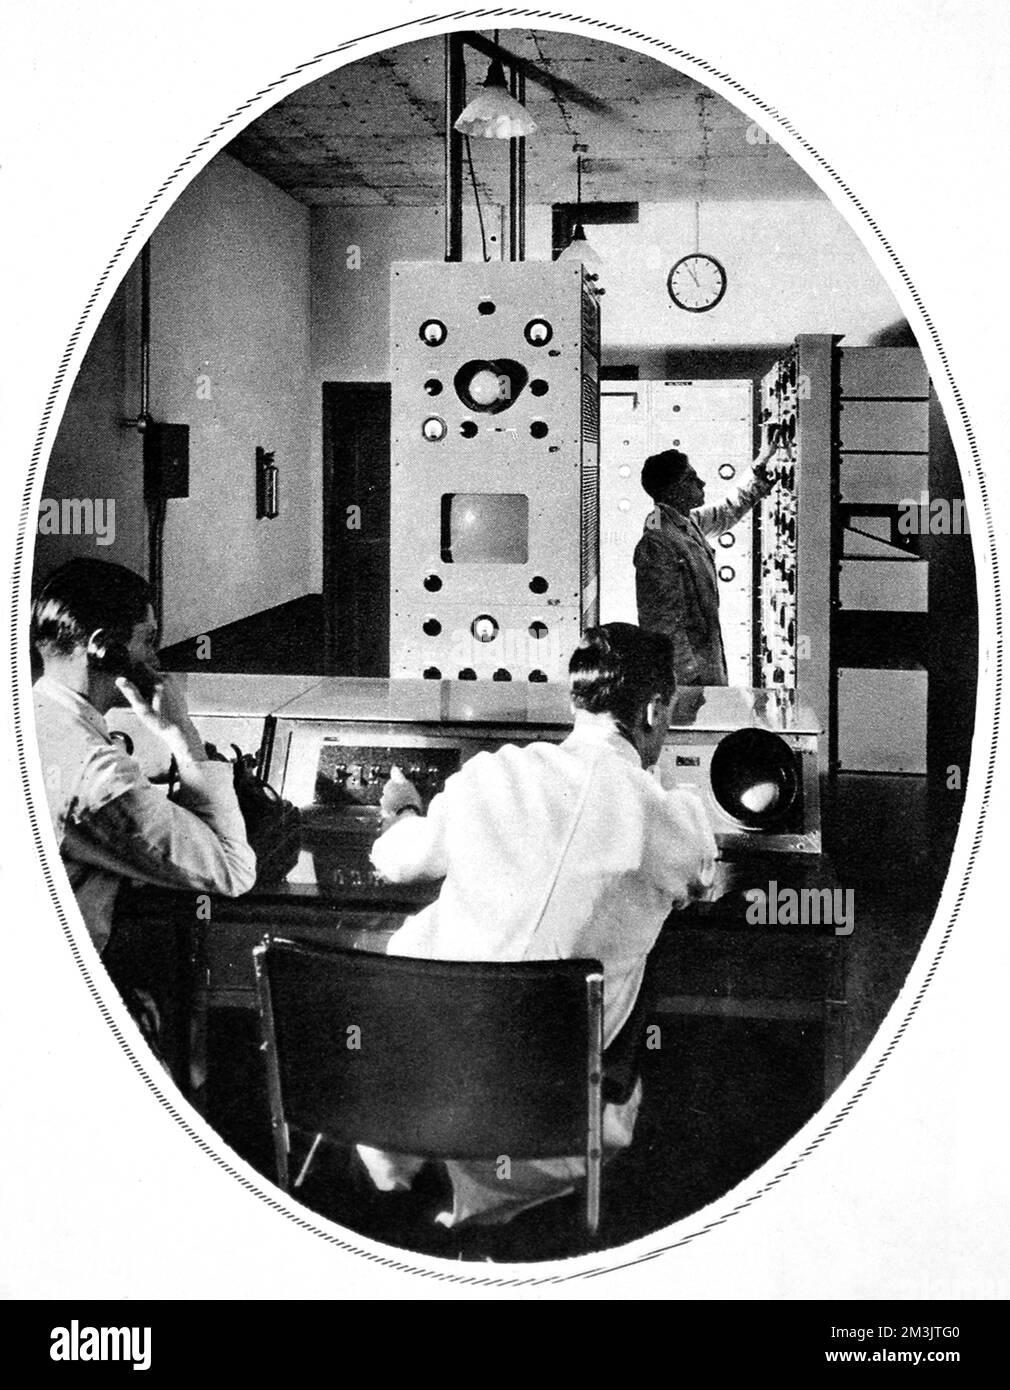 Scene in the heart of the control room of the Baird apparatus. Special tests of reception of the B.B.C from Alexandra Palace of synchronised television and speech were held at Olympia by a committe of the Radio Manufacturers' Association. On alternate days transmissions from Alexandra Palace were given by Baird and Marconi E.M.I systems. In 1935 the B.B.C experimented with John Logie Baird's television system and Marconi's E.M.I system. The E.M.I succeeded Baird's in 1937.  1936 Stock Photo